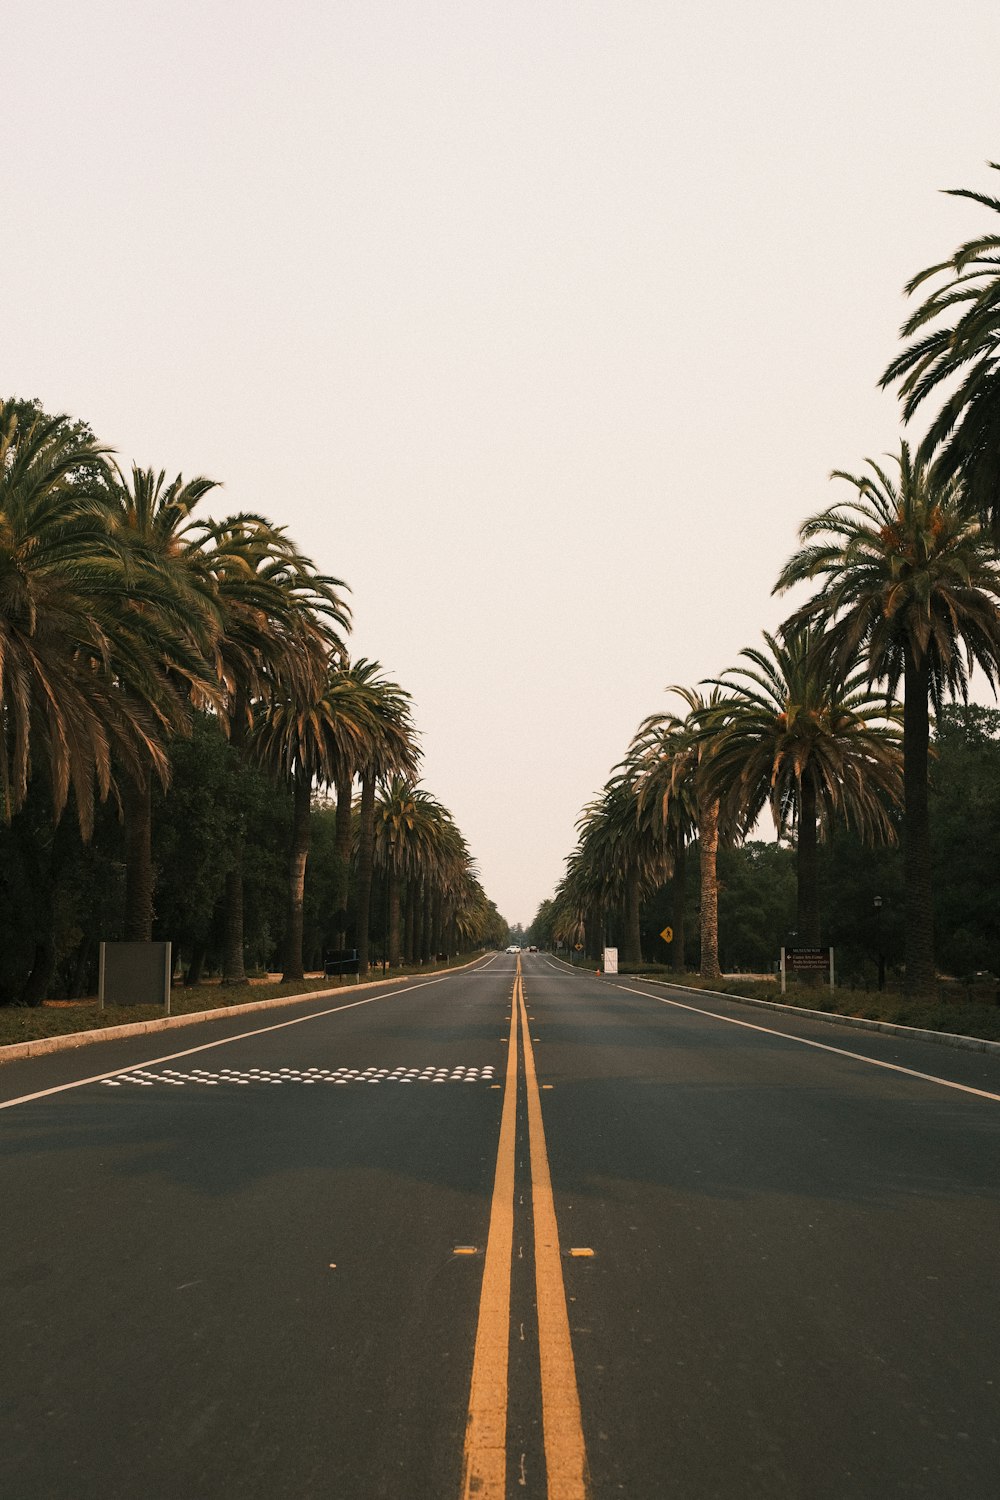 gray concrete road between palm trees